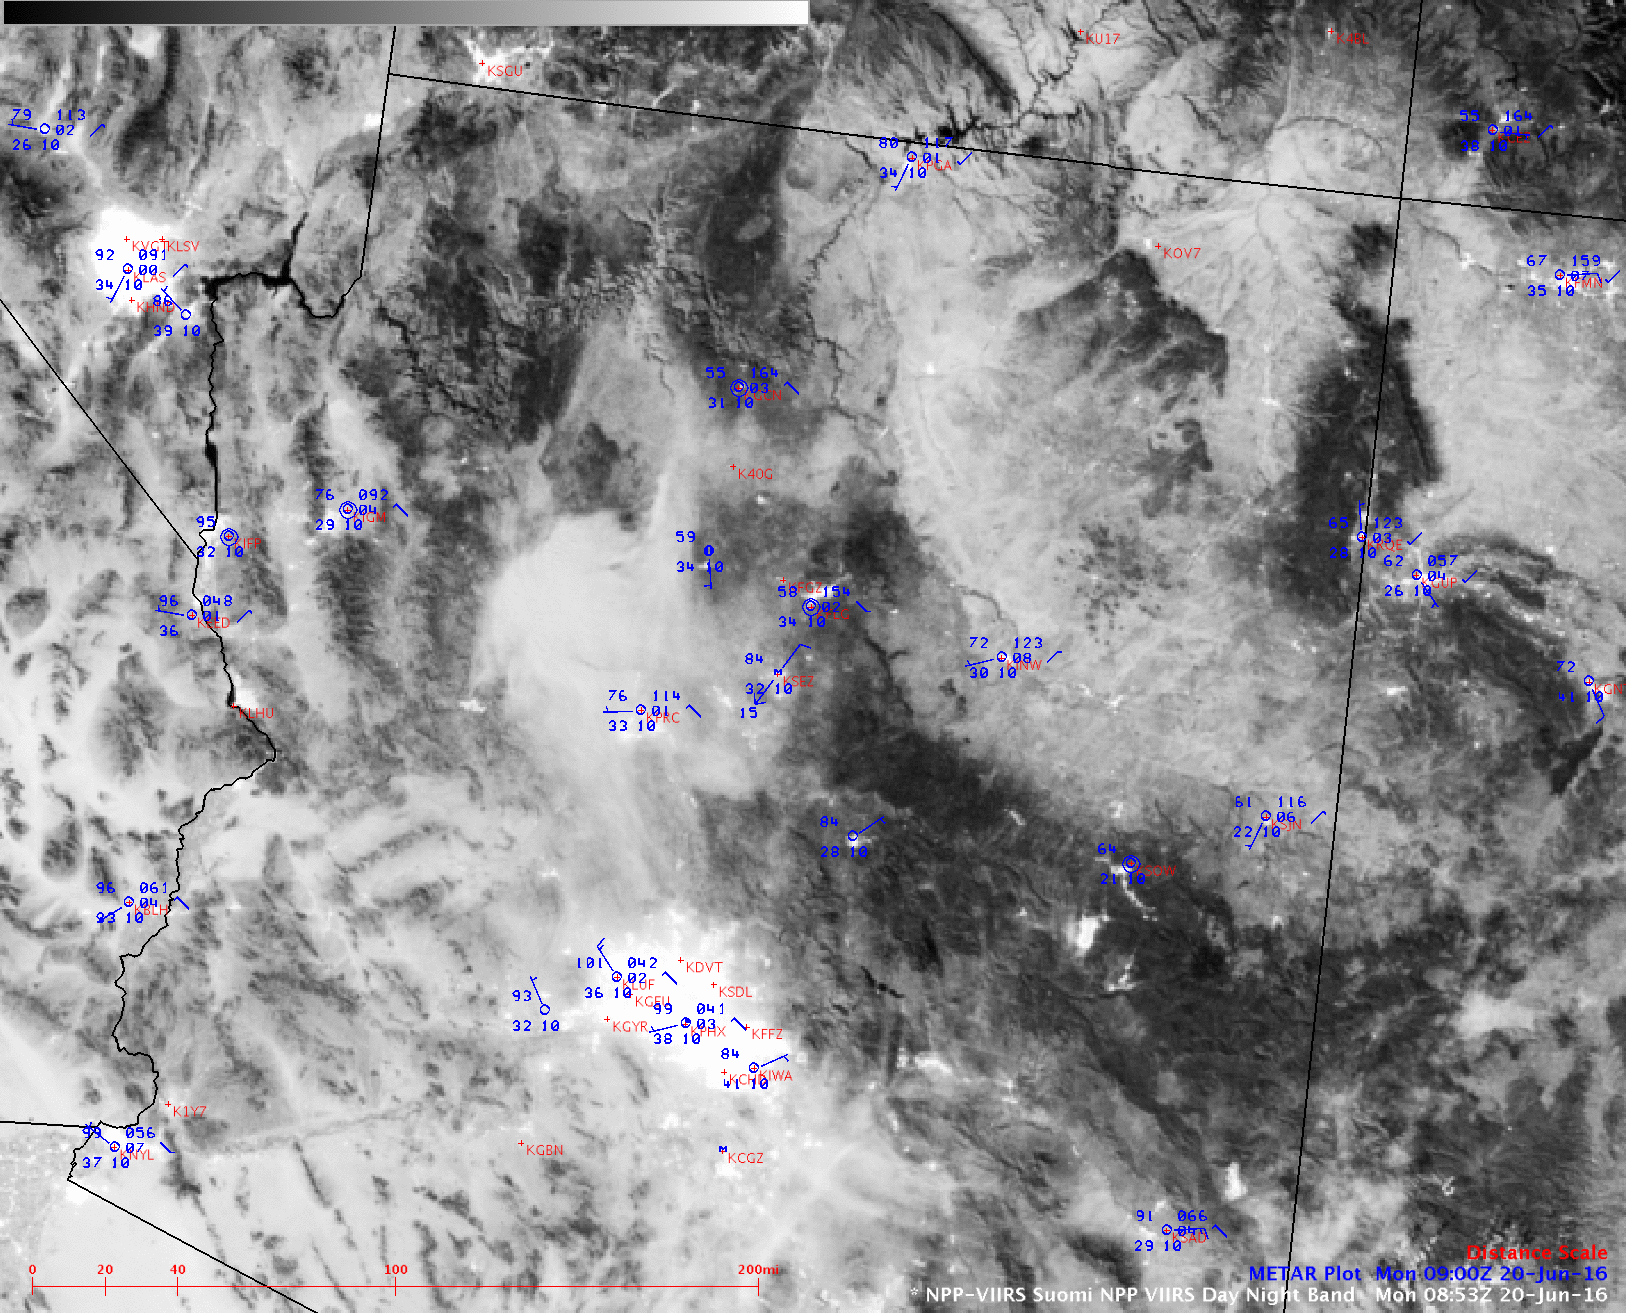 Suomi NPP VIIRS Day/Night Band (0.7 µm), Shortwave Infrared (3.74 µm) and Infrared Window (11.45 µm) images [click to enlarge]